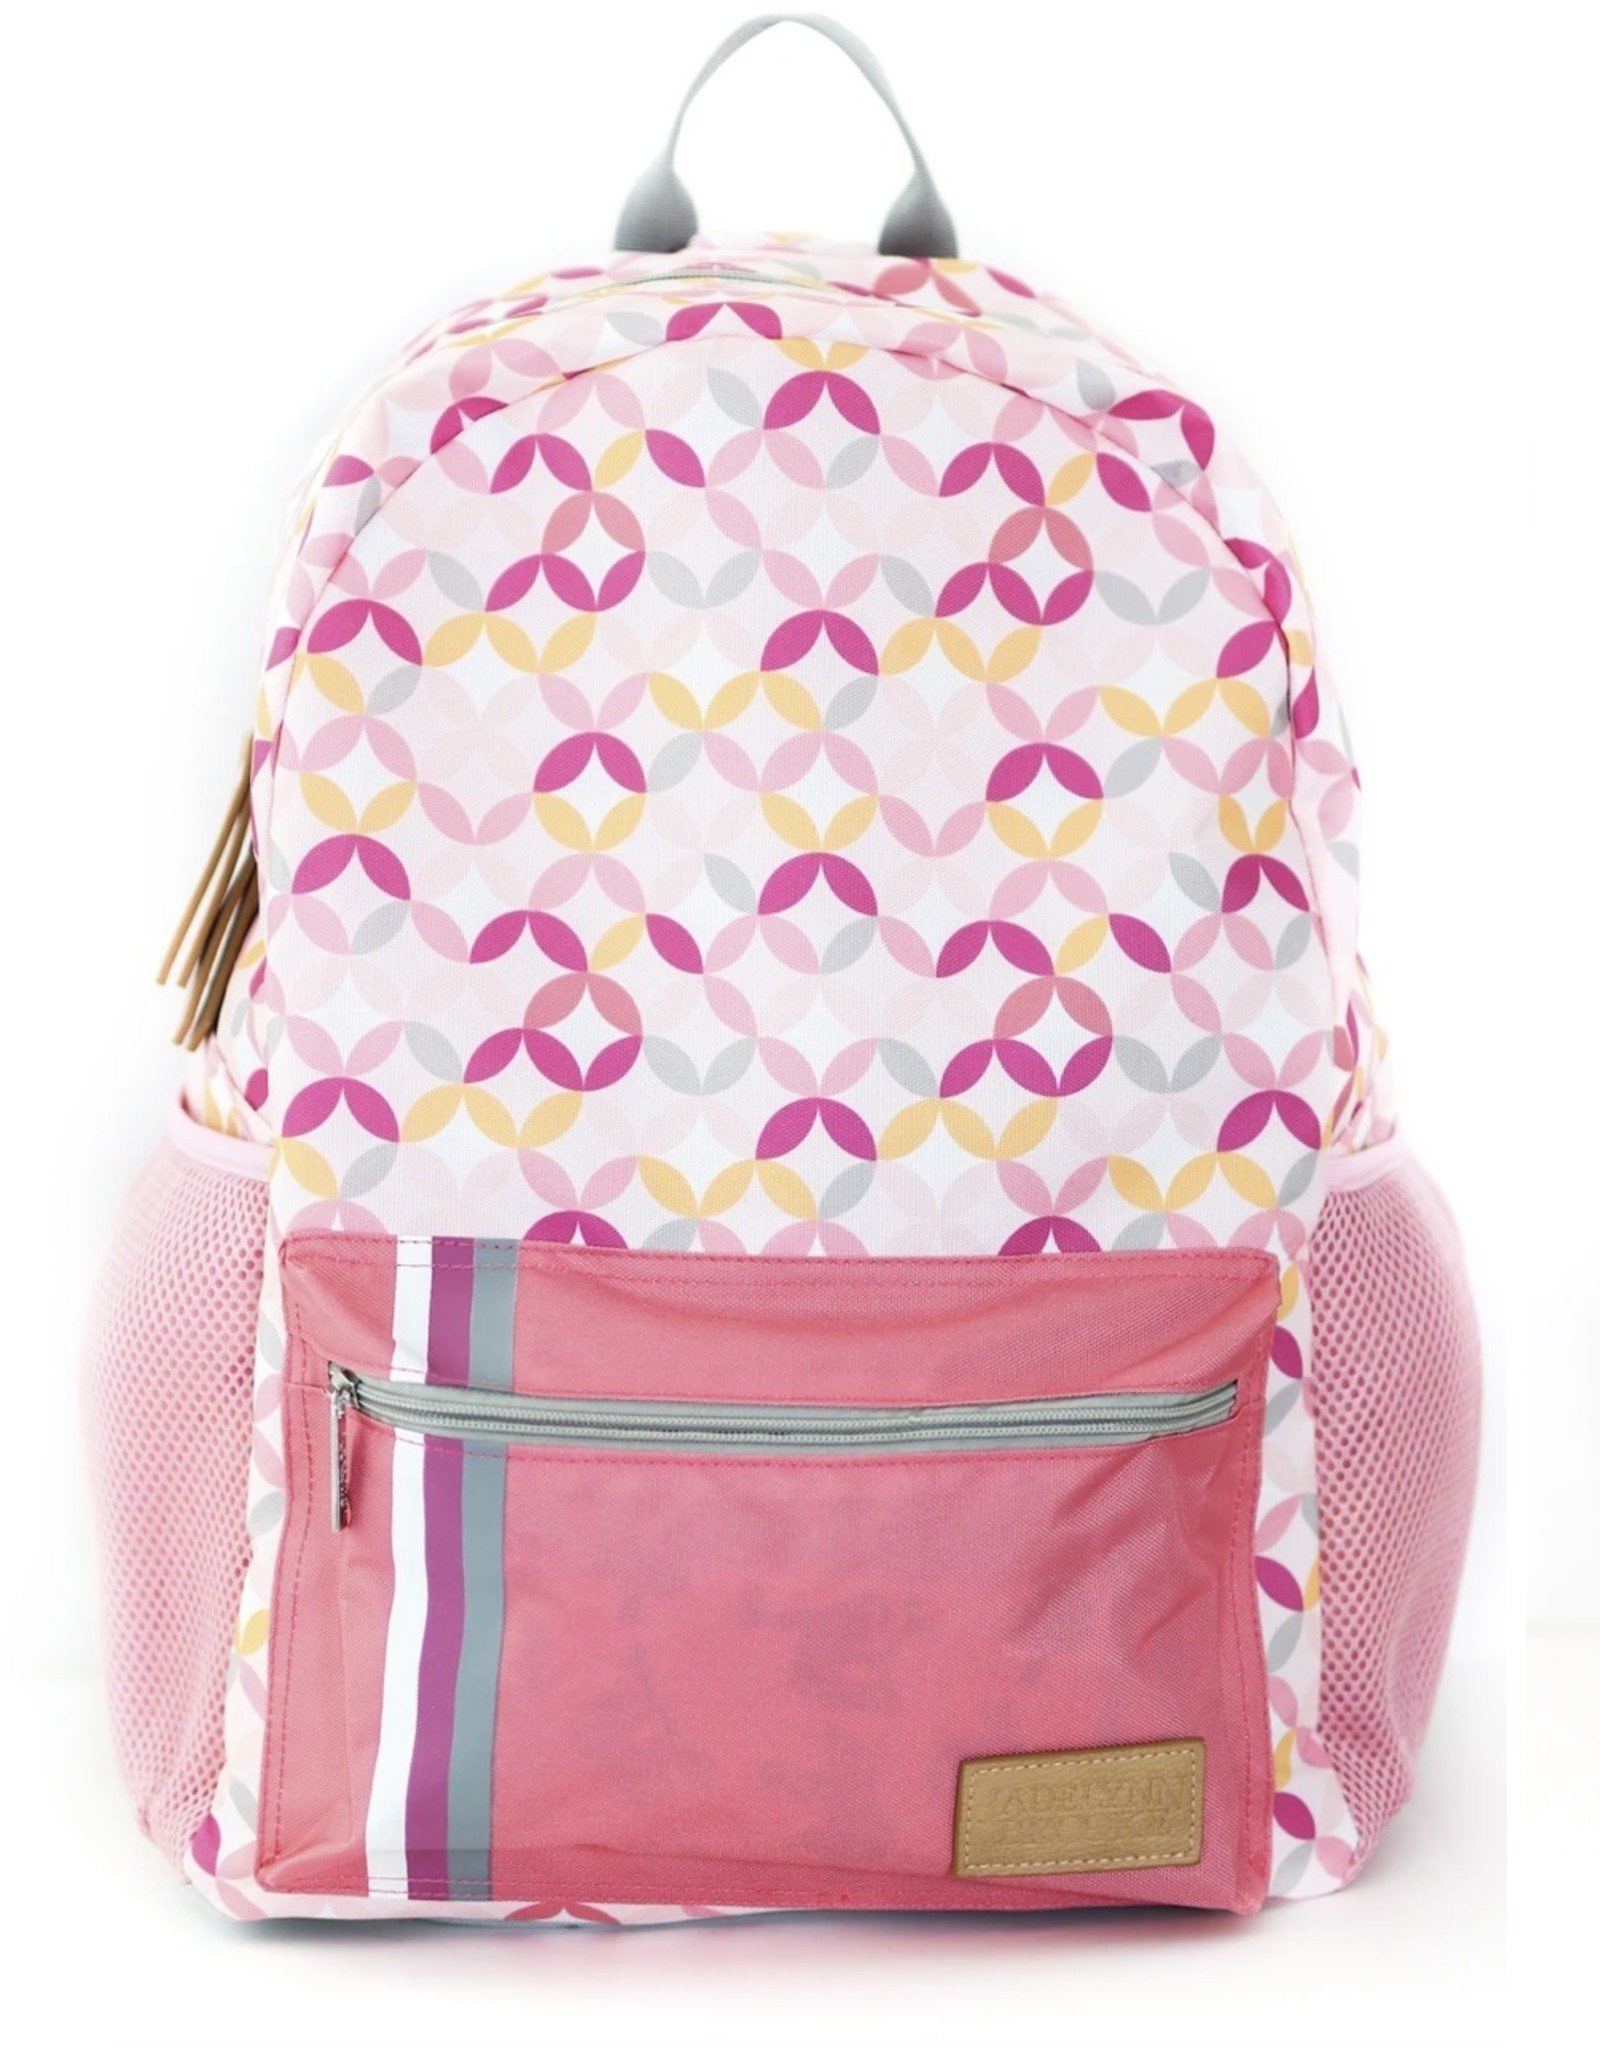 3HH Backpack Coral Patterned